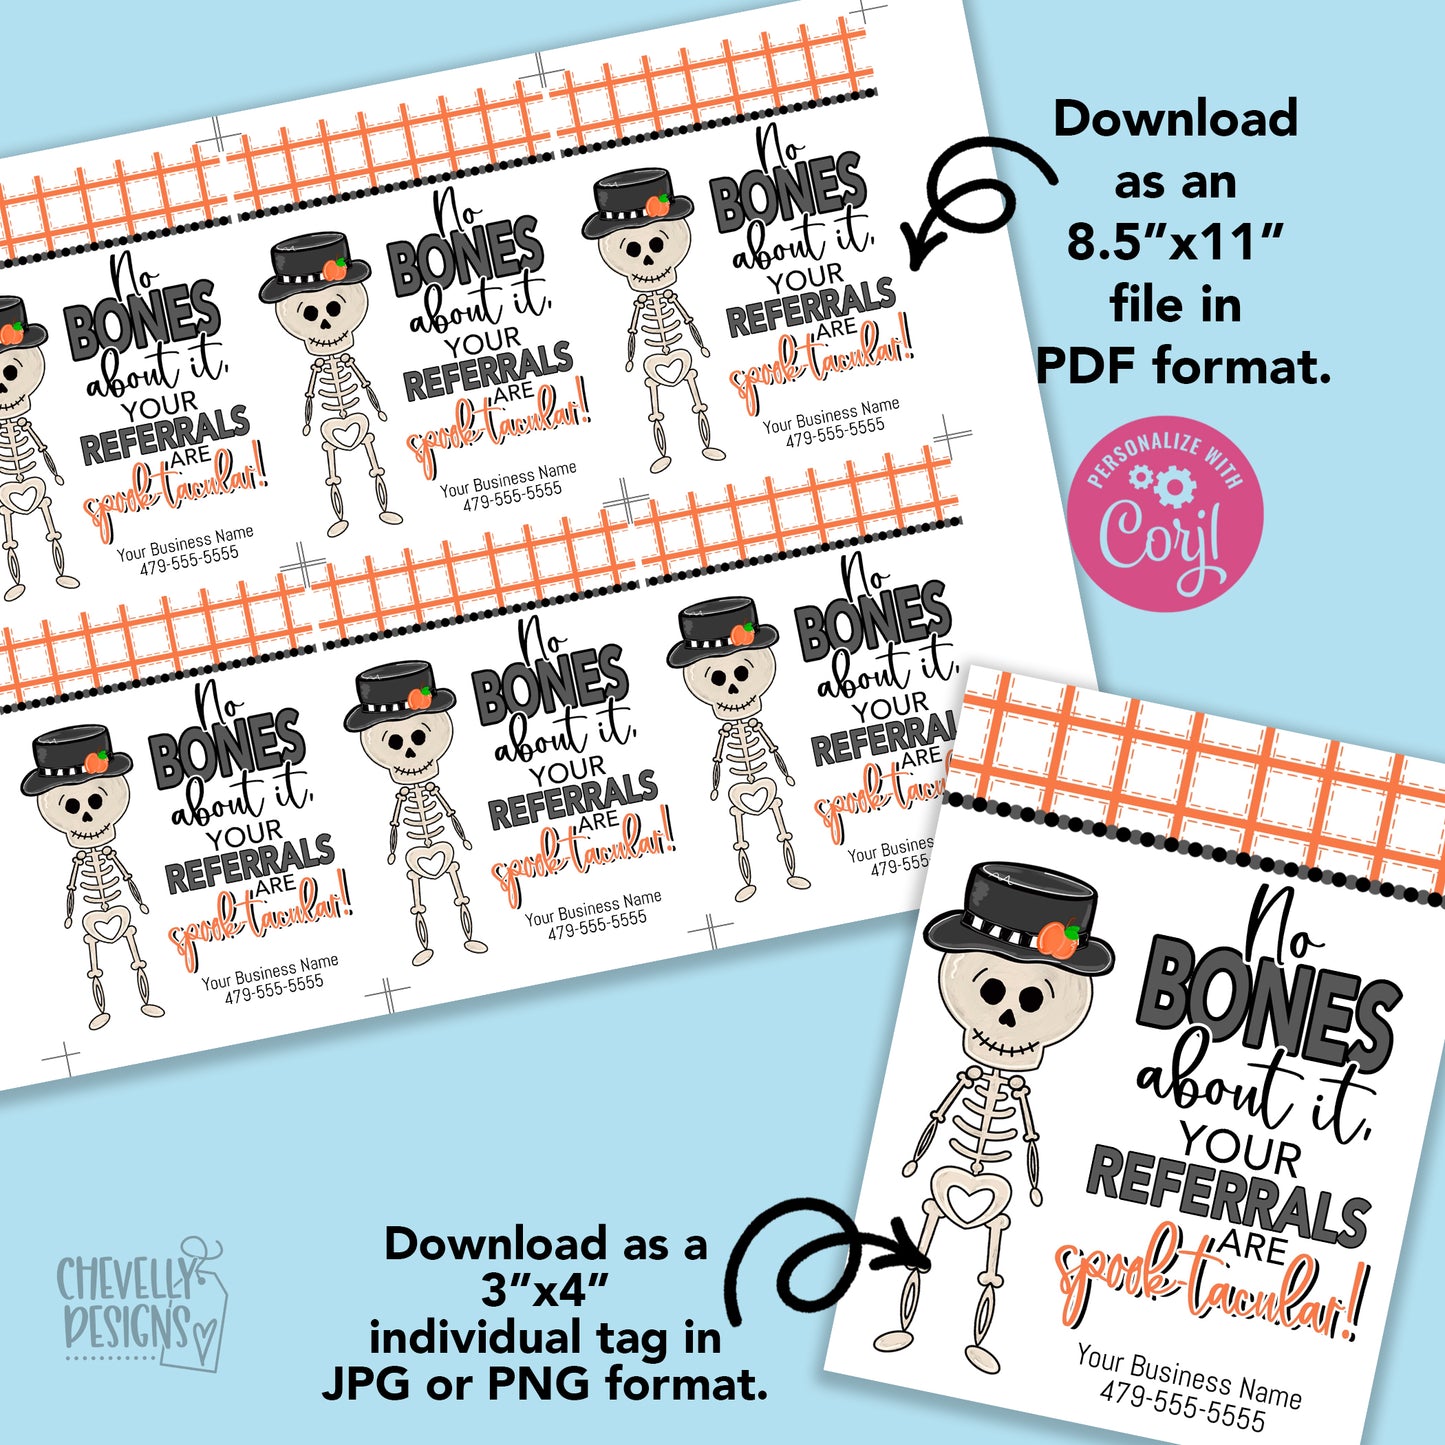 Editable - No Bones About It, Your Referrals are Spook-tacular - Business Gift Tags - Printable Digital File